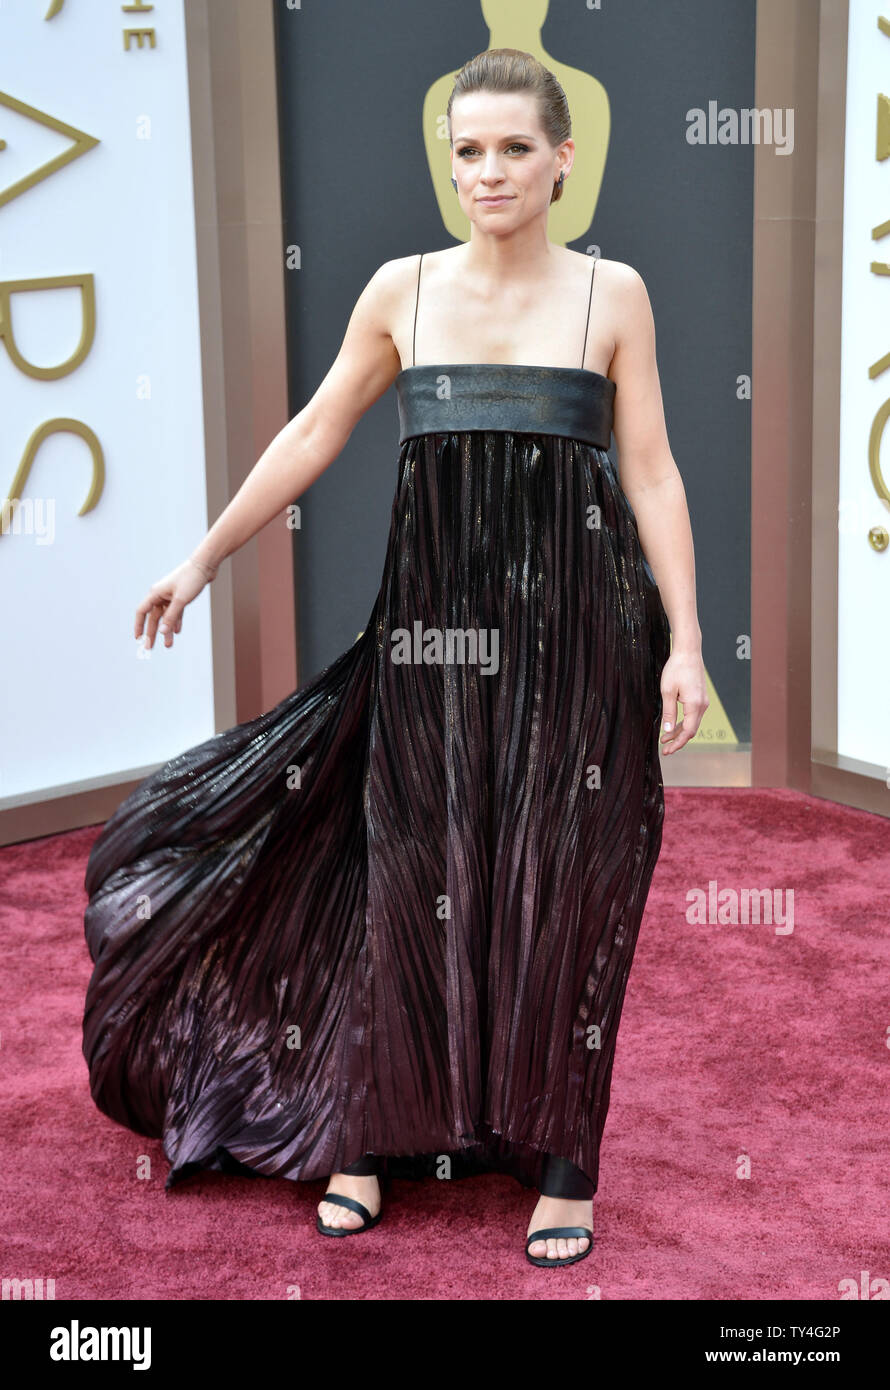 Veerle Baetens arrives on the red carpet at the 86th Academy Awards at Hollywood & Highland Center in the Hollywood section of Los Angeles on March 2, 2014.    UPI/Kevin Dietsch Stock Photo